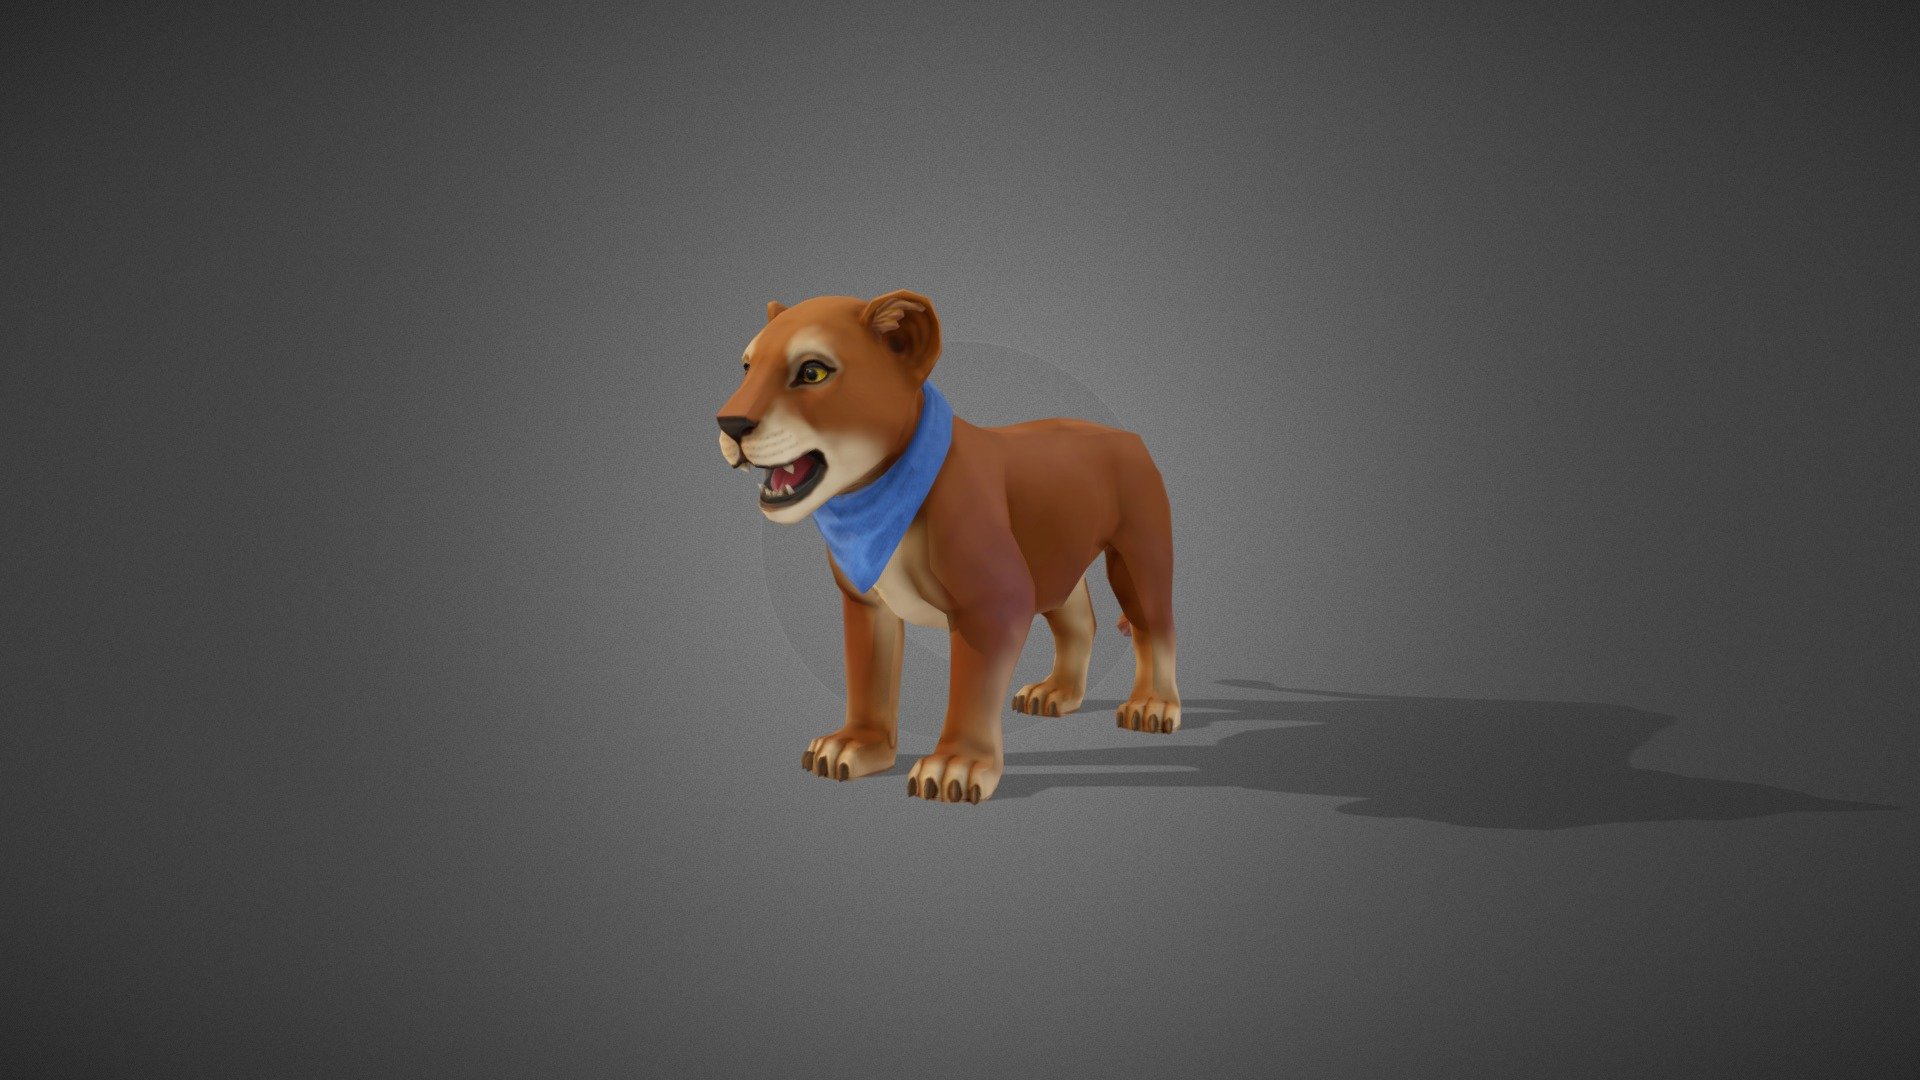 All Rights belongs to Pride Games Studio
Pet character for a Mobile Game EXILE SURVIVAL Model and textures made by Anton Milashin. Animation and Rig made by Ilya Trofimov. This is one of my works for Mobile project Exile Survival. I’ve created a set of animations for this character that you can find on locations and tame! And there is more lions (Adult Female and Male) models and animations, fell free to check out them on my profile 3d model